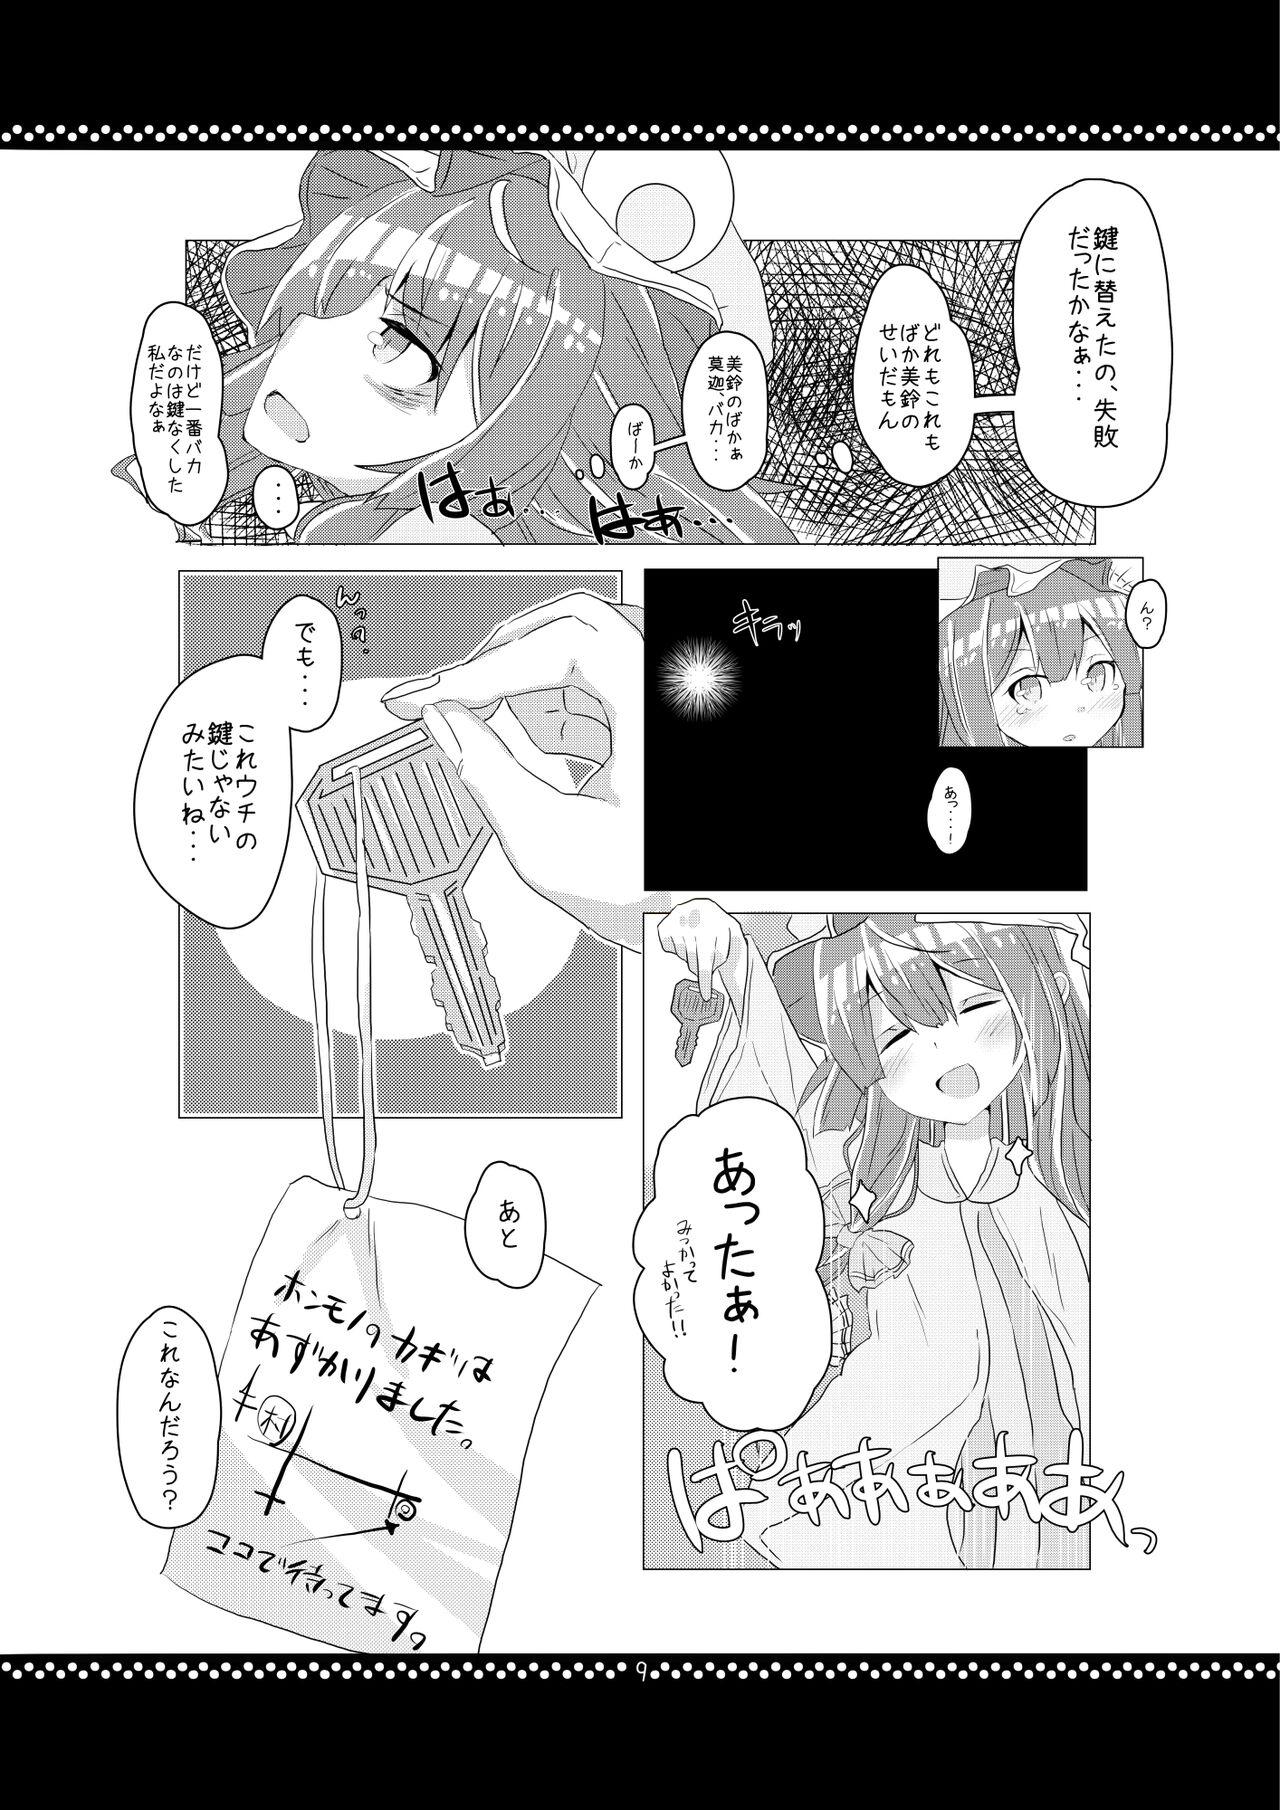 18 Porn 従順？パチュリーさま！ - Touhou project Gay Gloryhole - Page 8